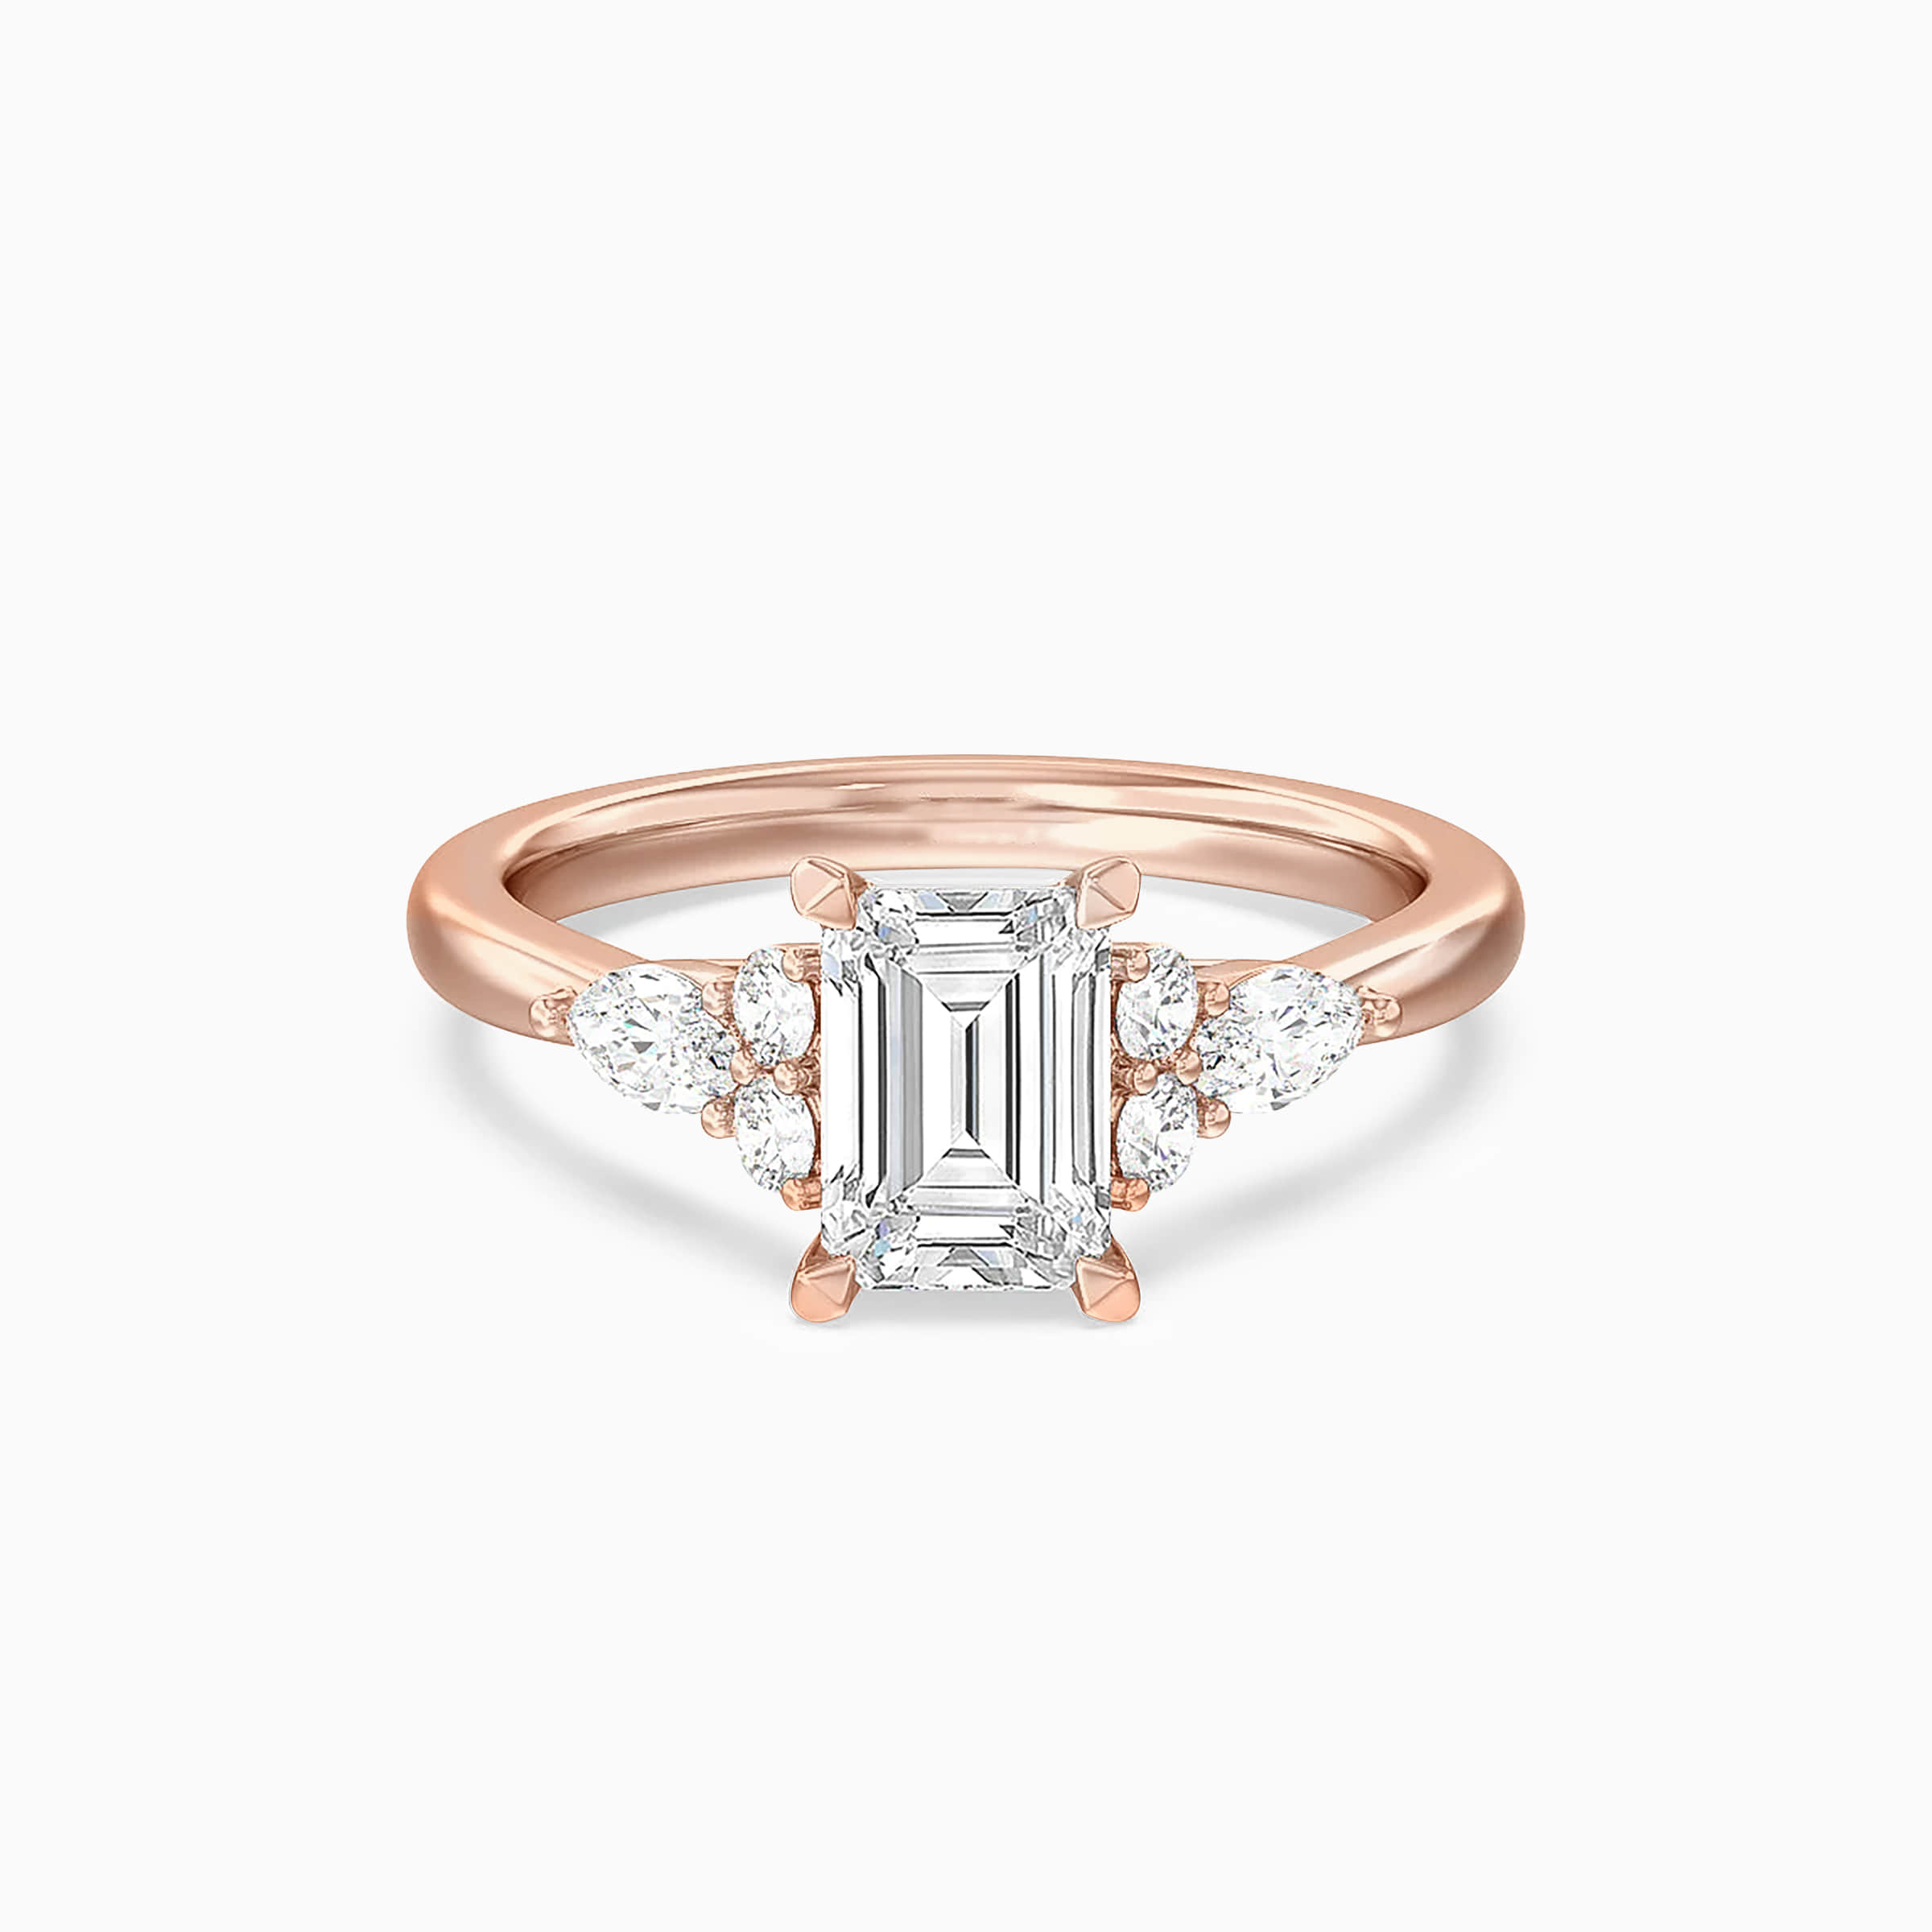 Darry Ring emerald cut engagement ring with side stones in rose gold